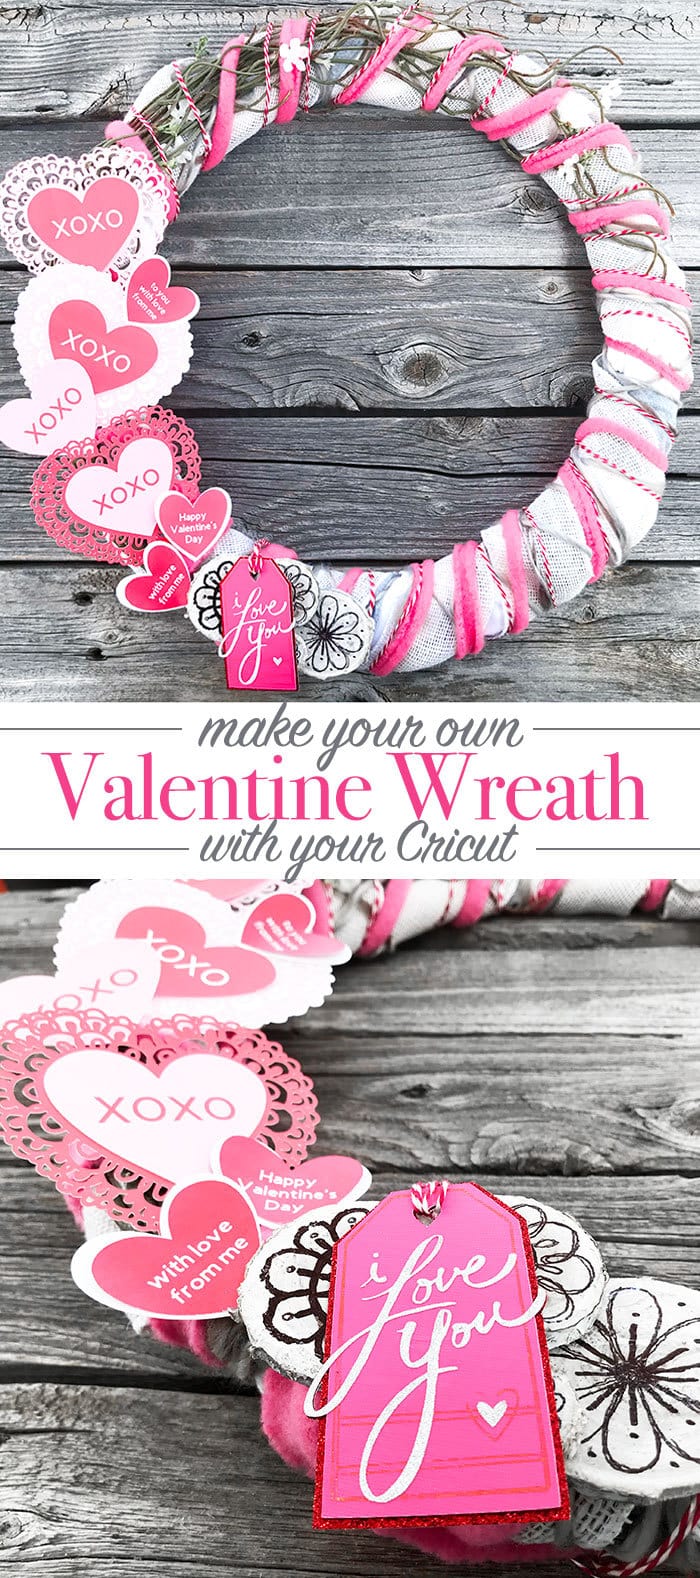 Make a Valentine Wreath with your Cricut - heart designs by Jen Goode